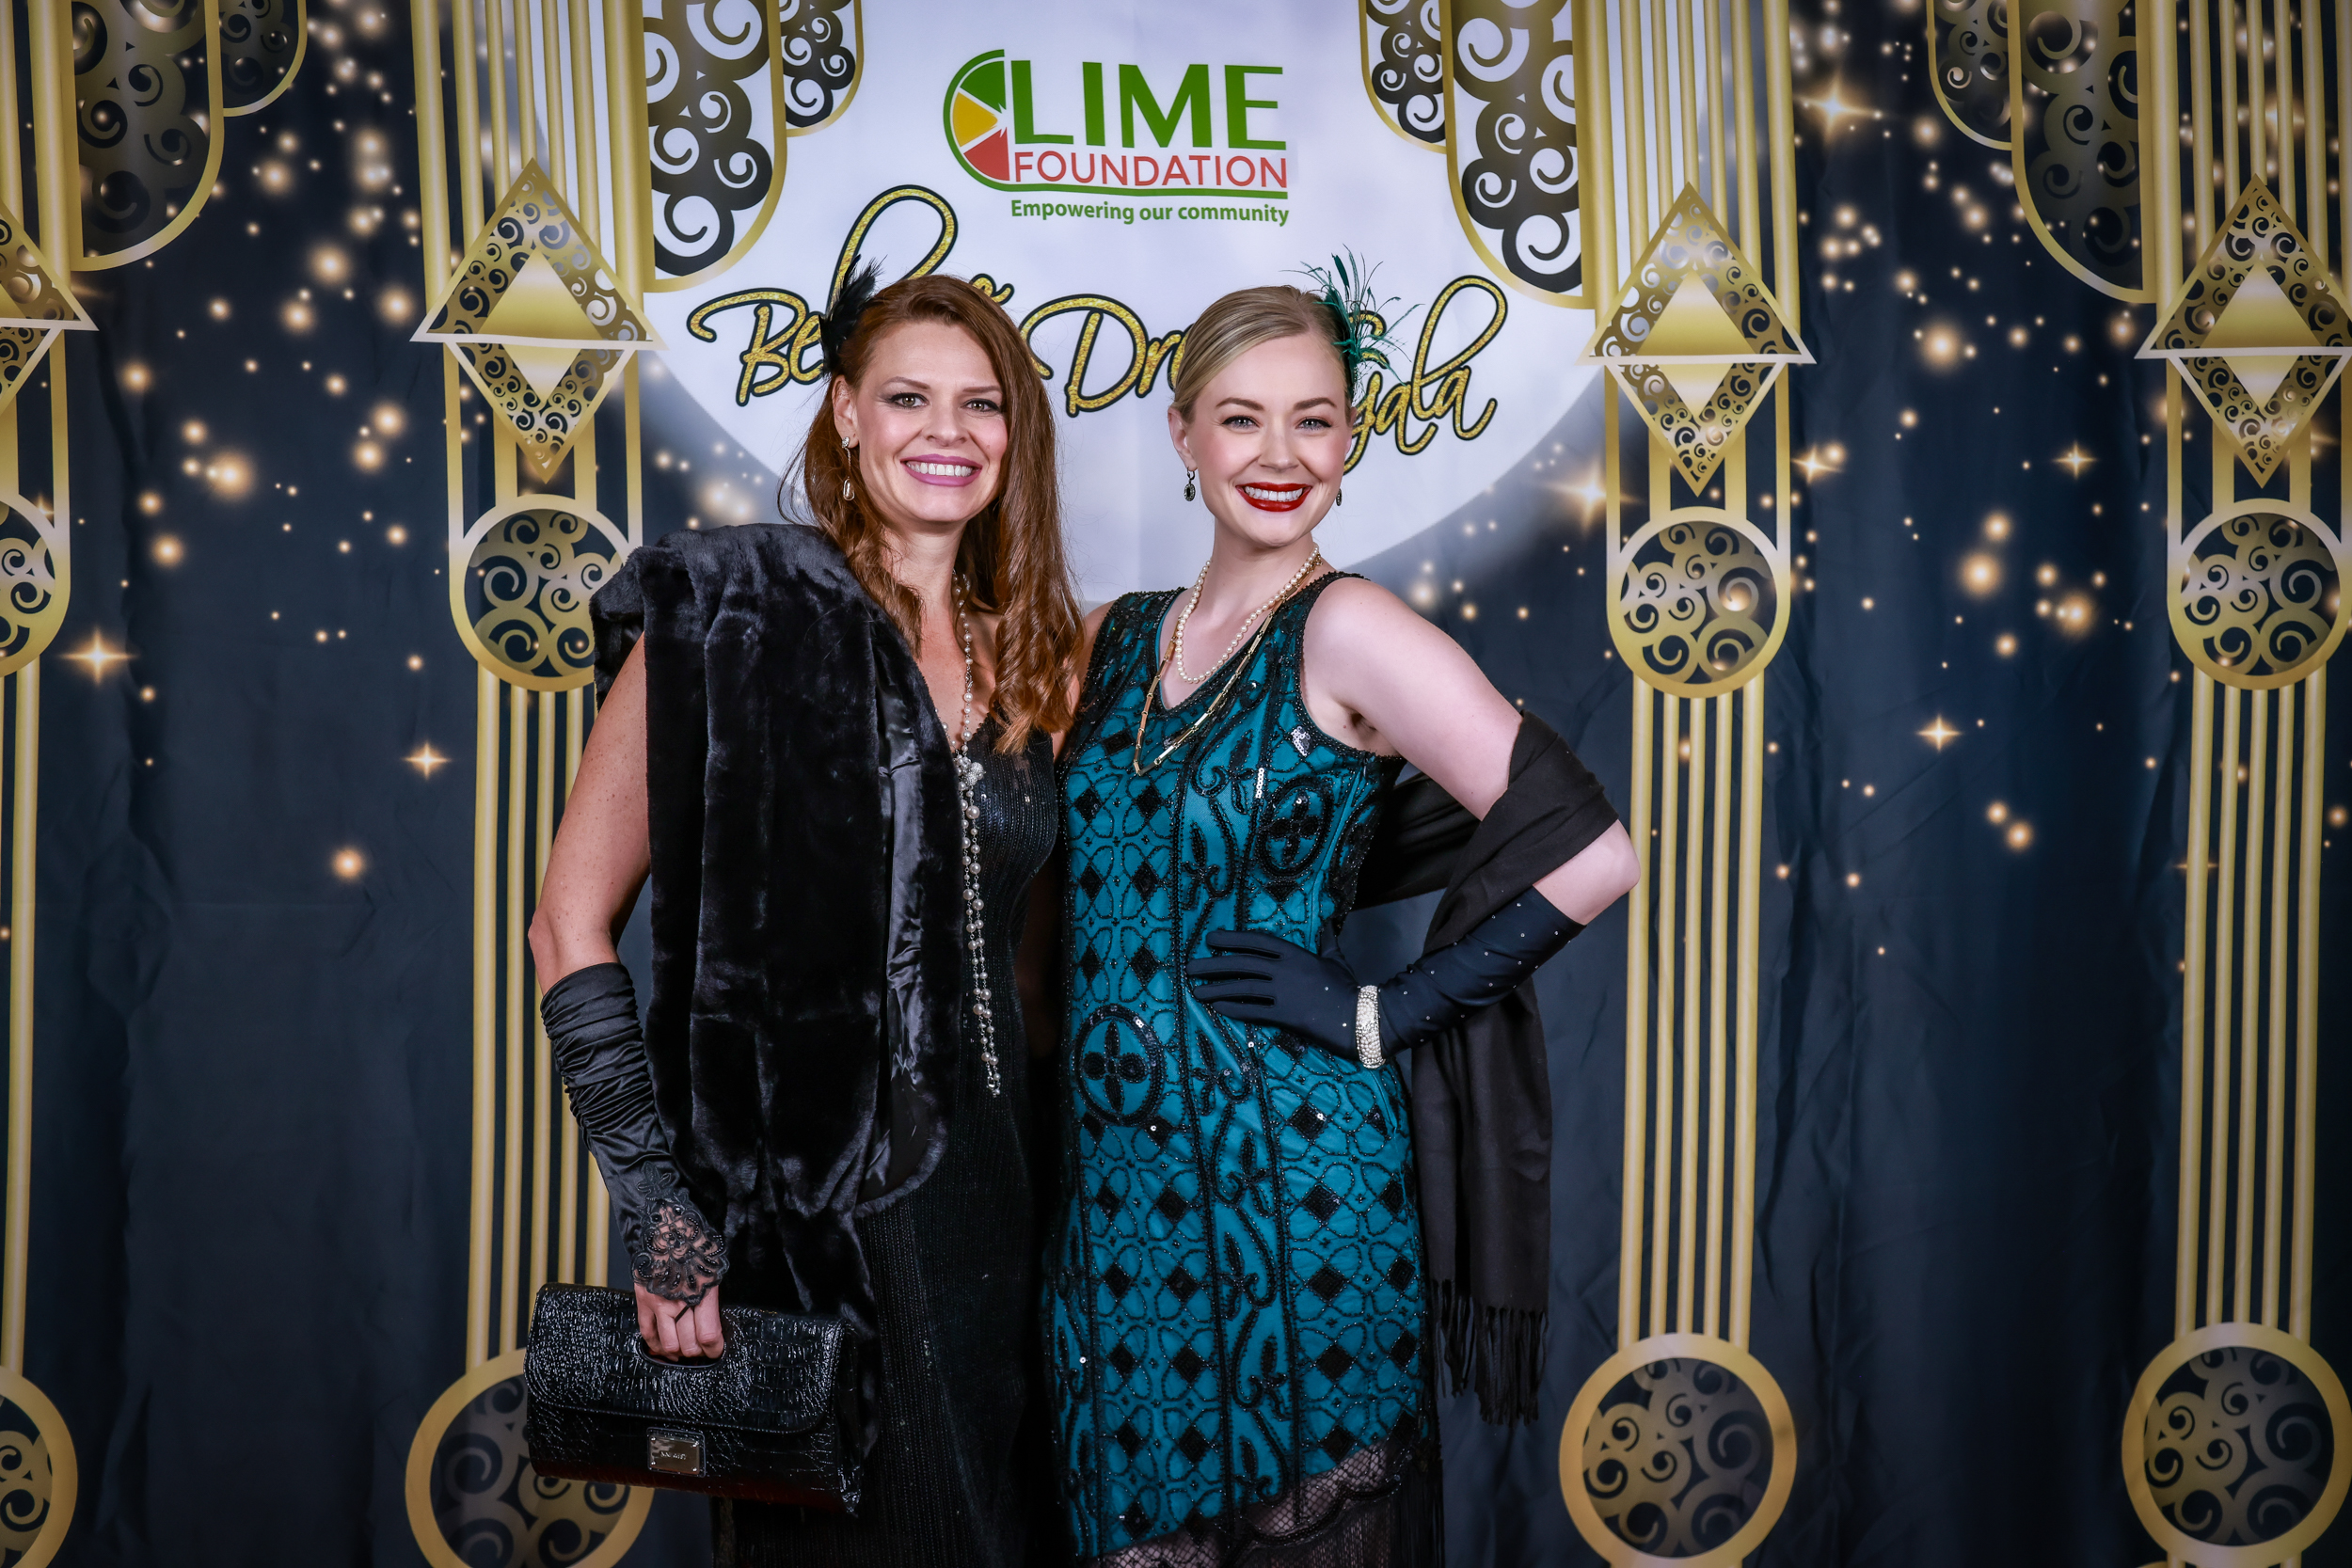 Two women posing for a photo at a Lime Foundation event.